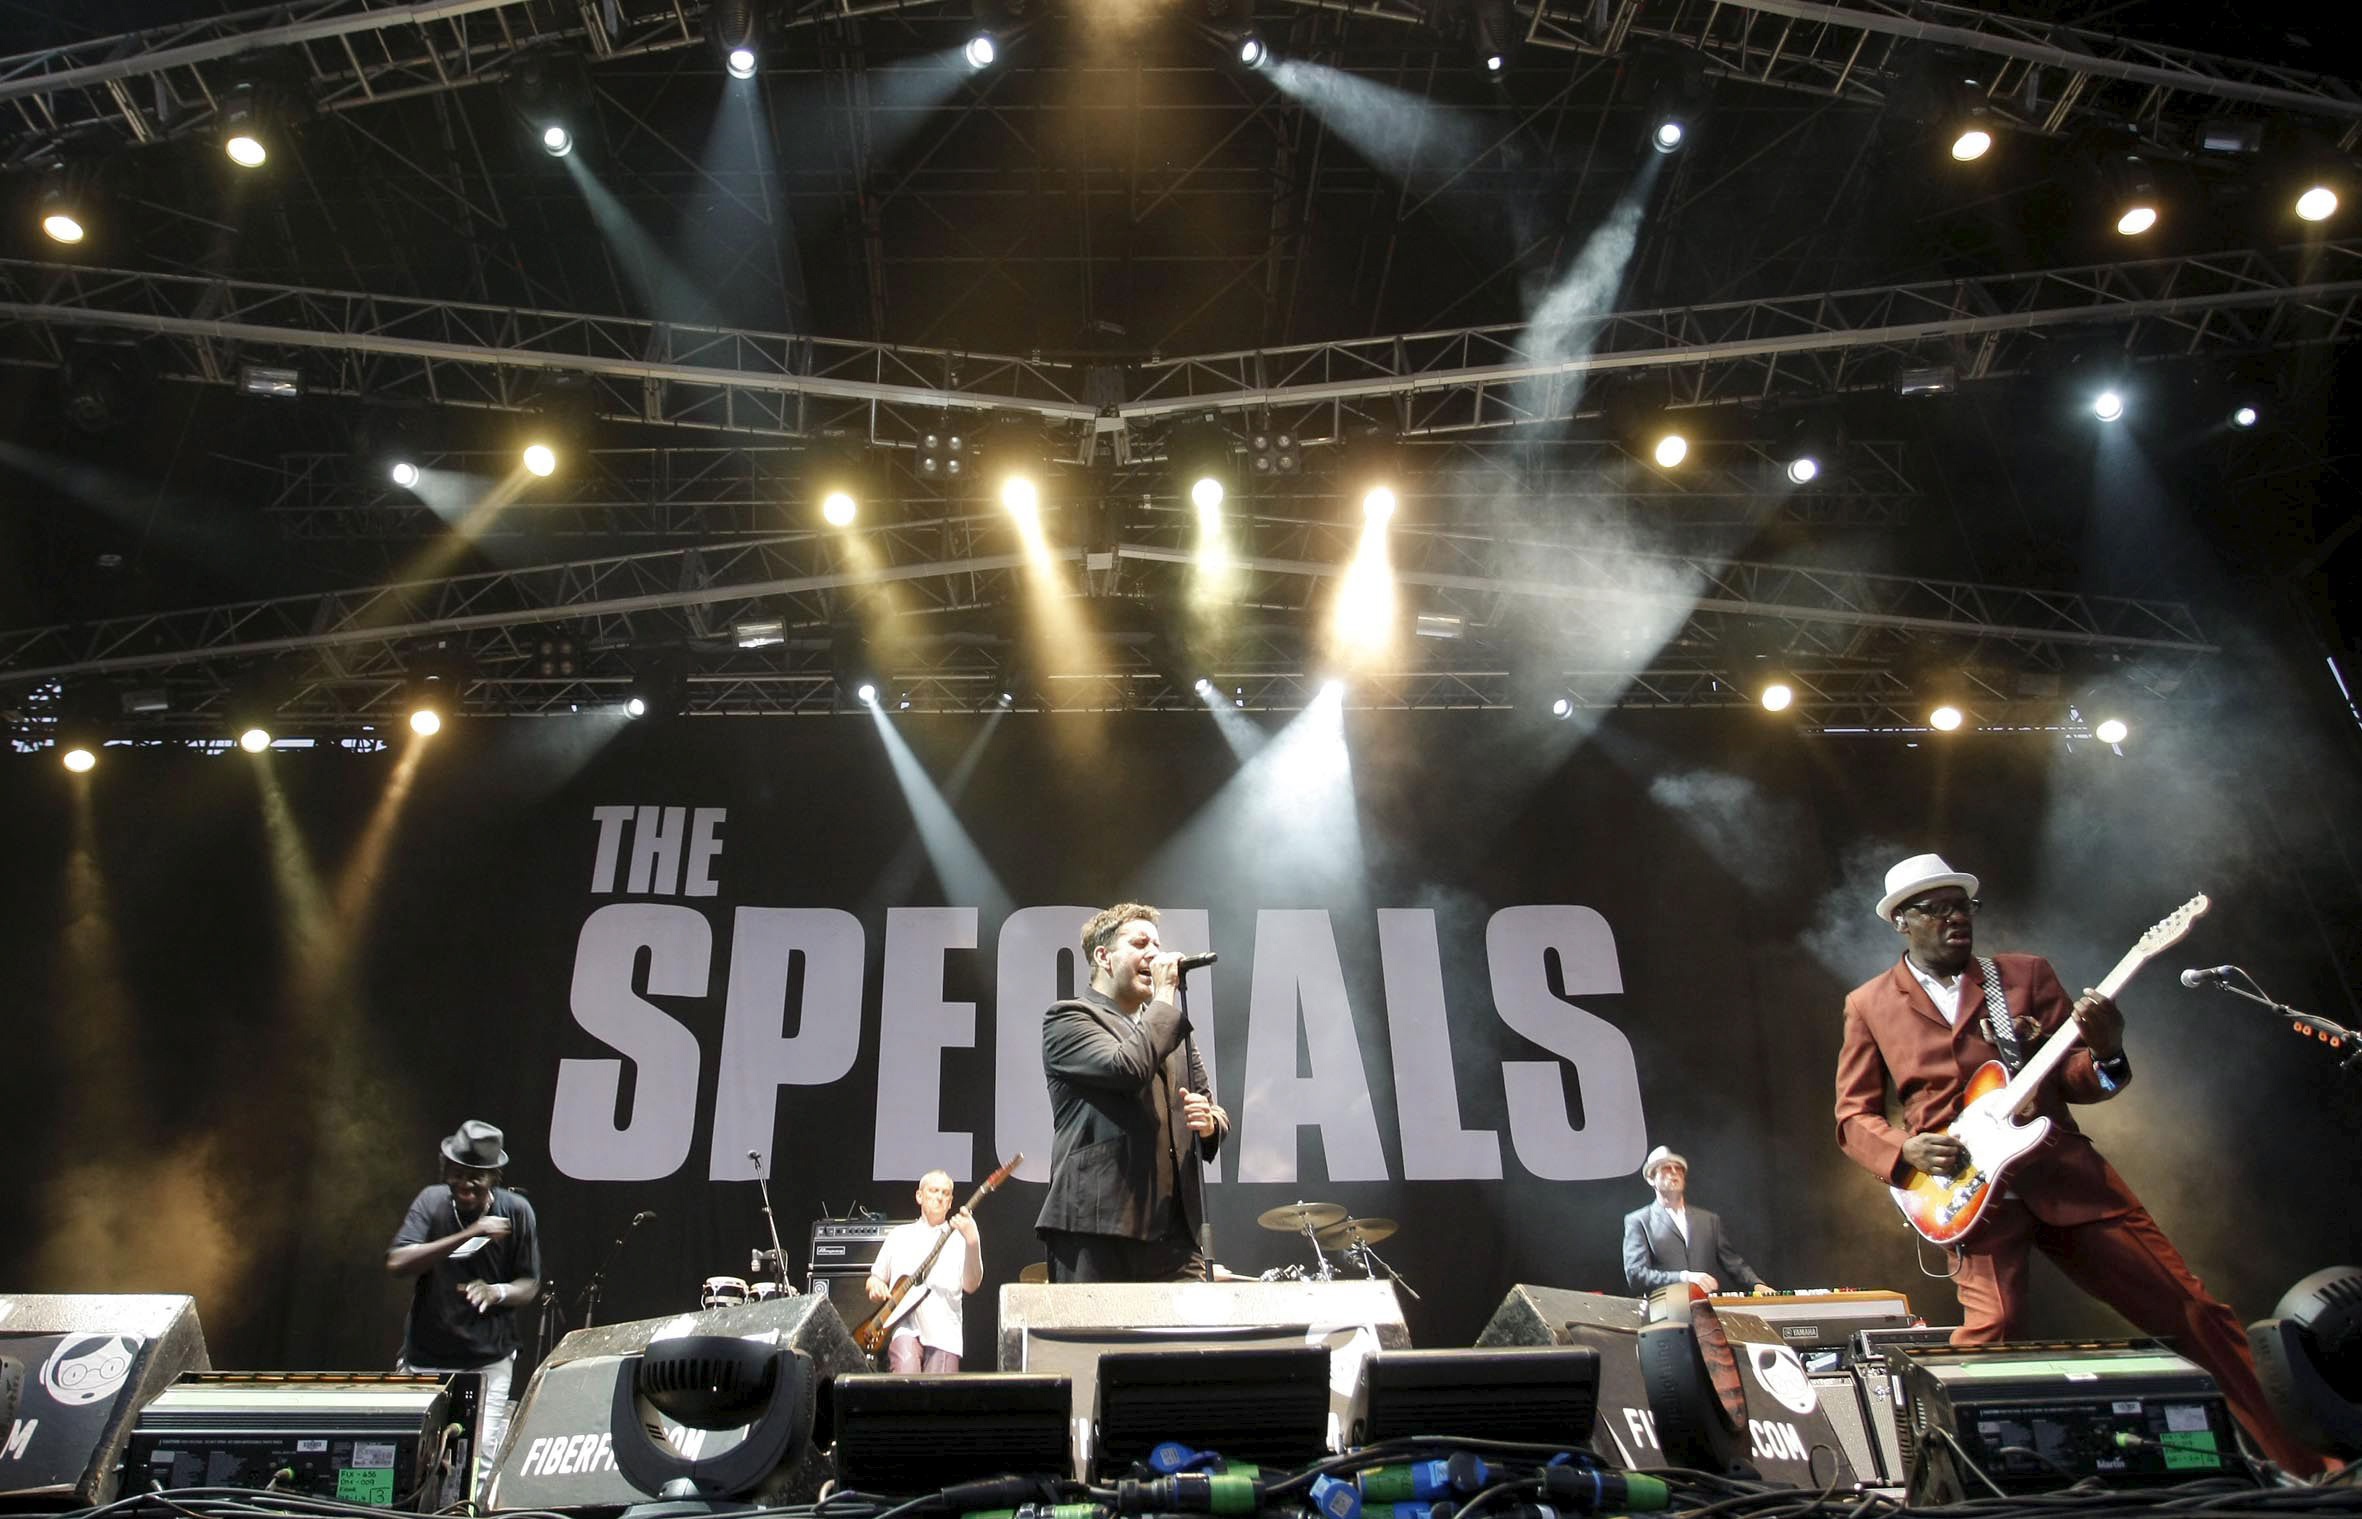 epa02251797 British rock band 'The Specials' perform on the stage during a concert at the 16th Benicassim International Festival (FIB) in Benicassim, eastern Spain, on 17 July 2010. EPA/DOMENECH CASTELLO